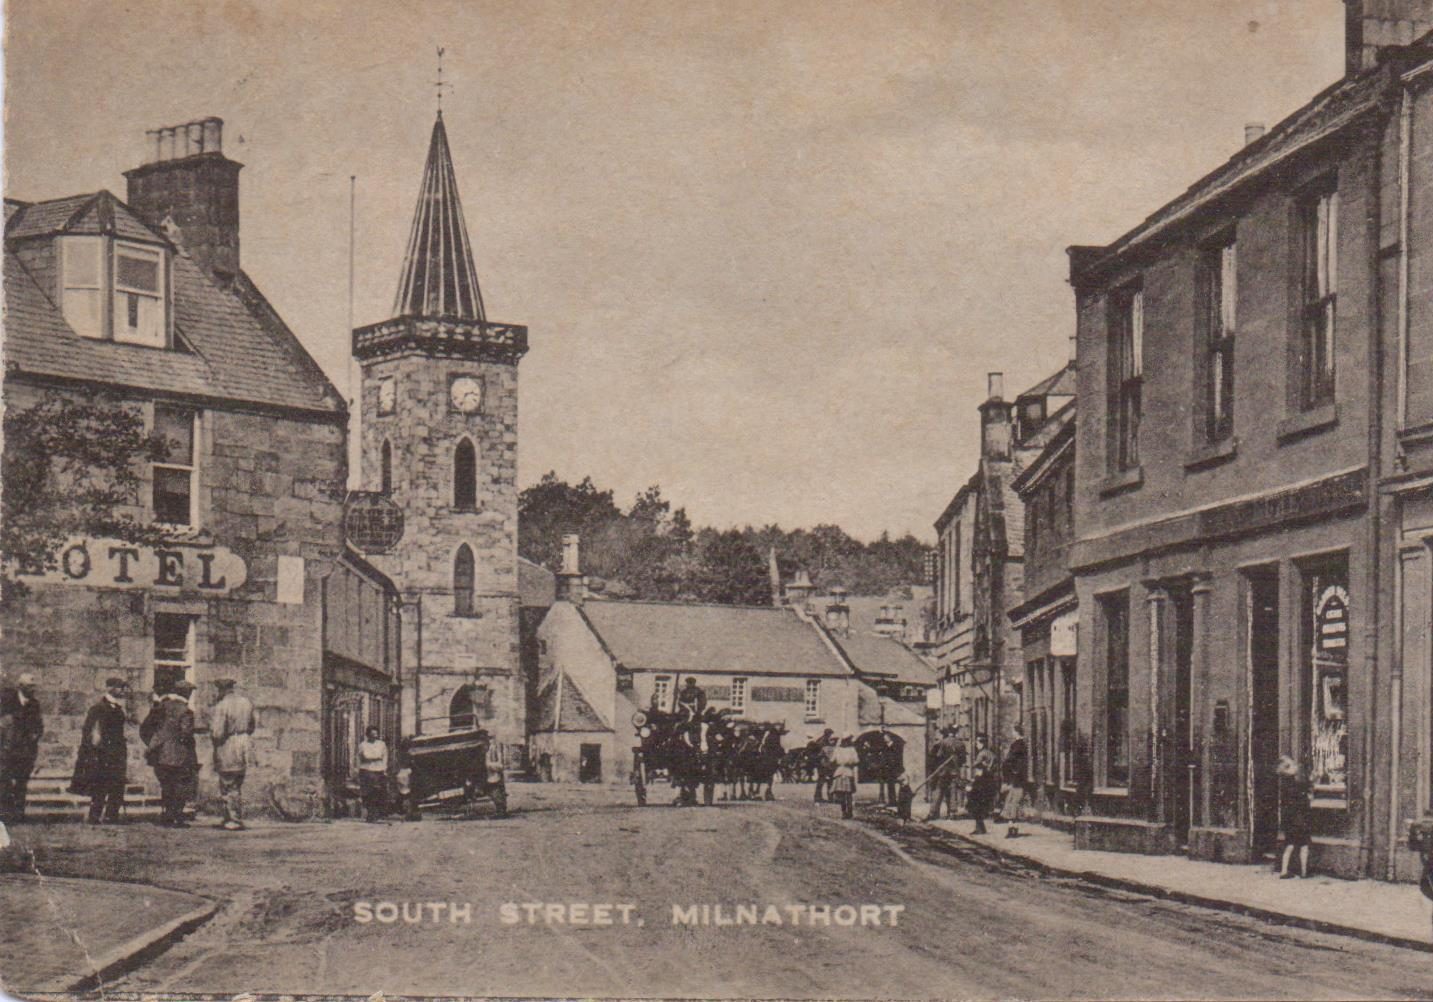 South Street, Milnathort in 1923. The Royal Hotel on the left of the picture and the Commercial Hotel in the centre are no longer hotels .